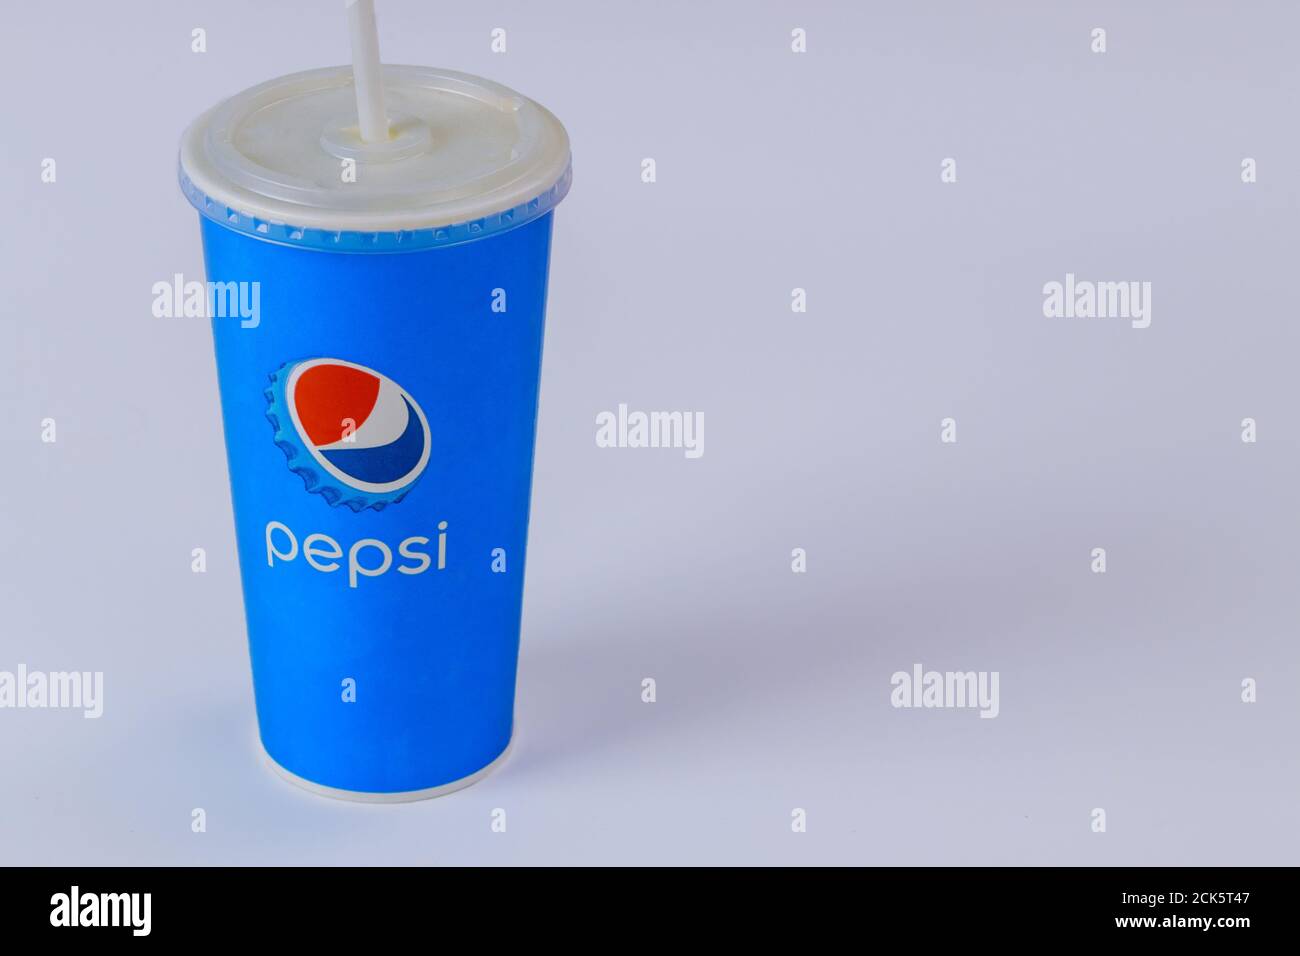 CLEWELAND OH US 15 SEPTEMBER 2020: A Pepsi paper disposable cup with paper straw a world famous carbonated soft drink, Illustrative editorial Stock Photo